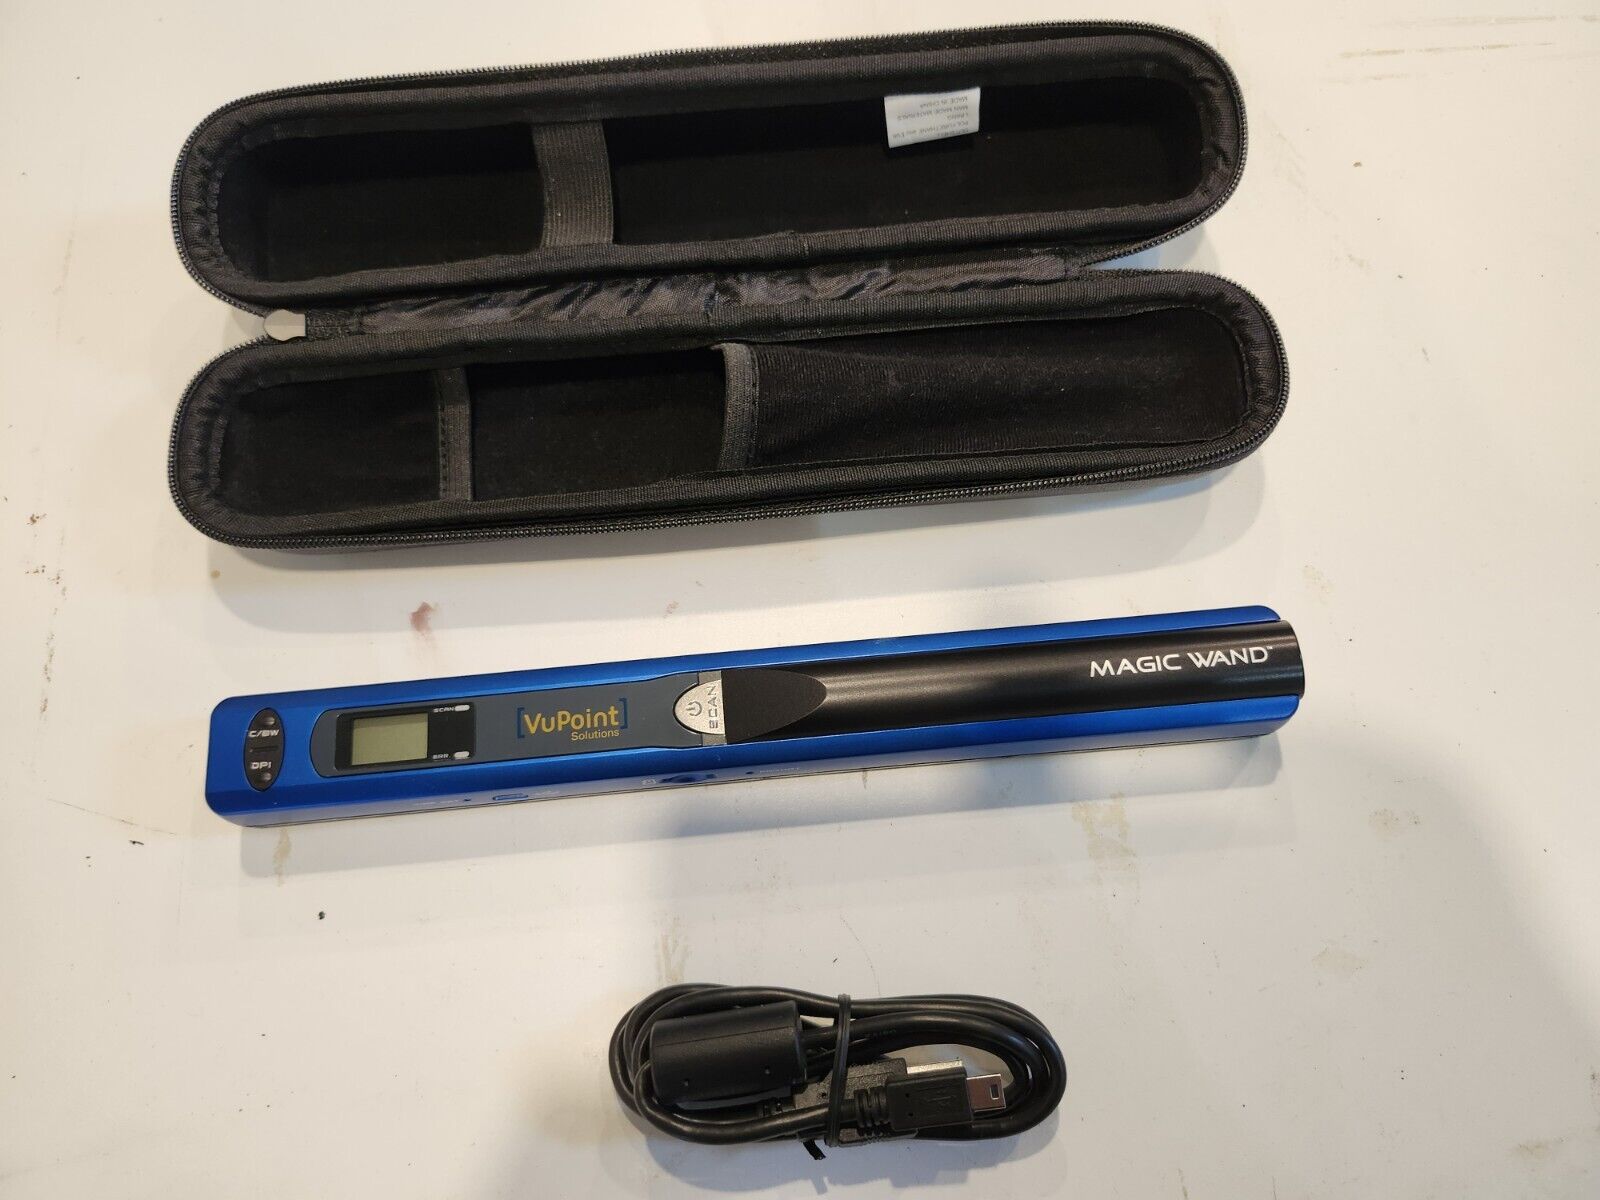 vupoint solutions magic wand portable scanner